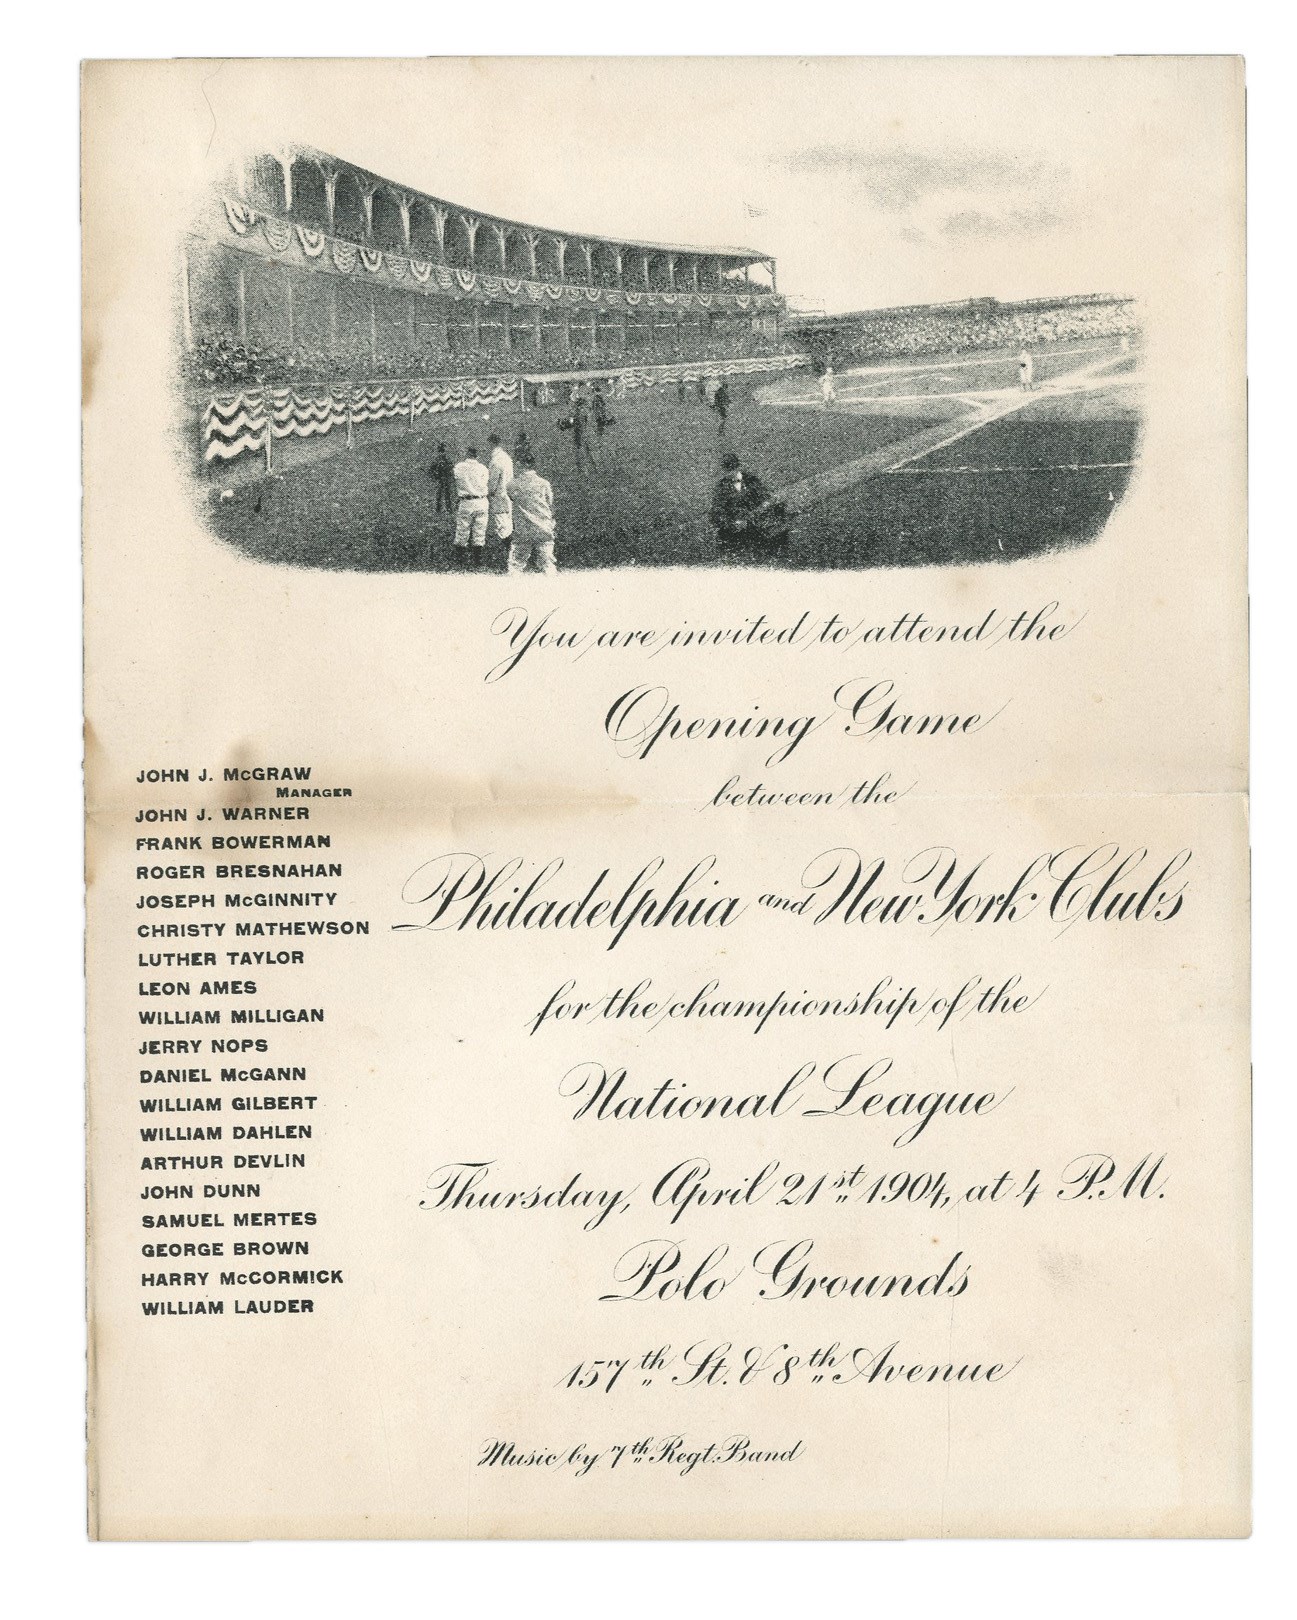 1904 New York Giants Polo Grounds Opening Day Invitation